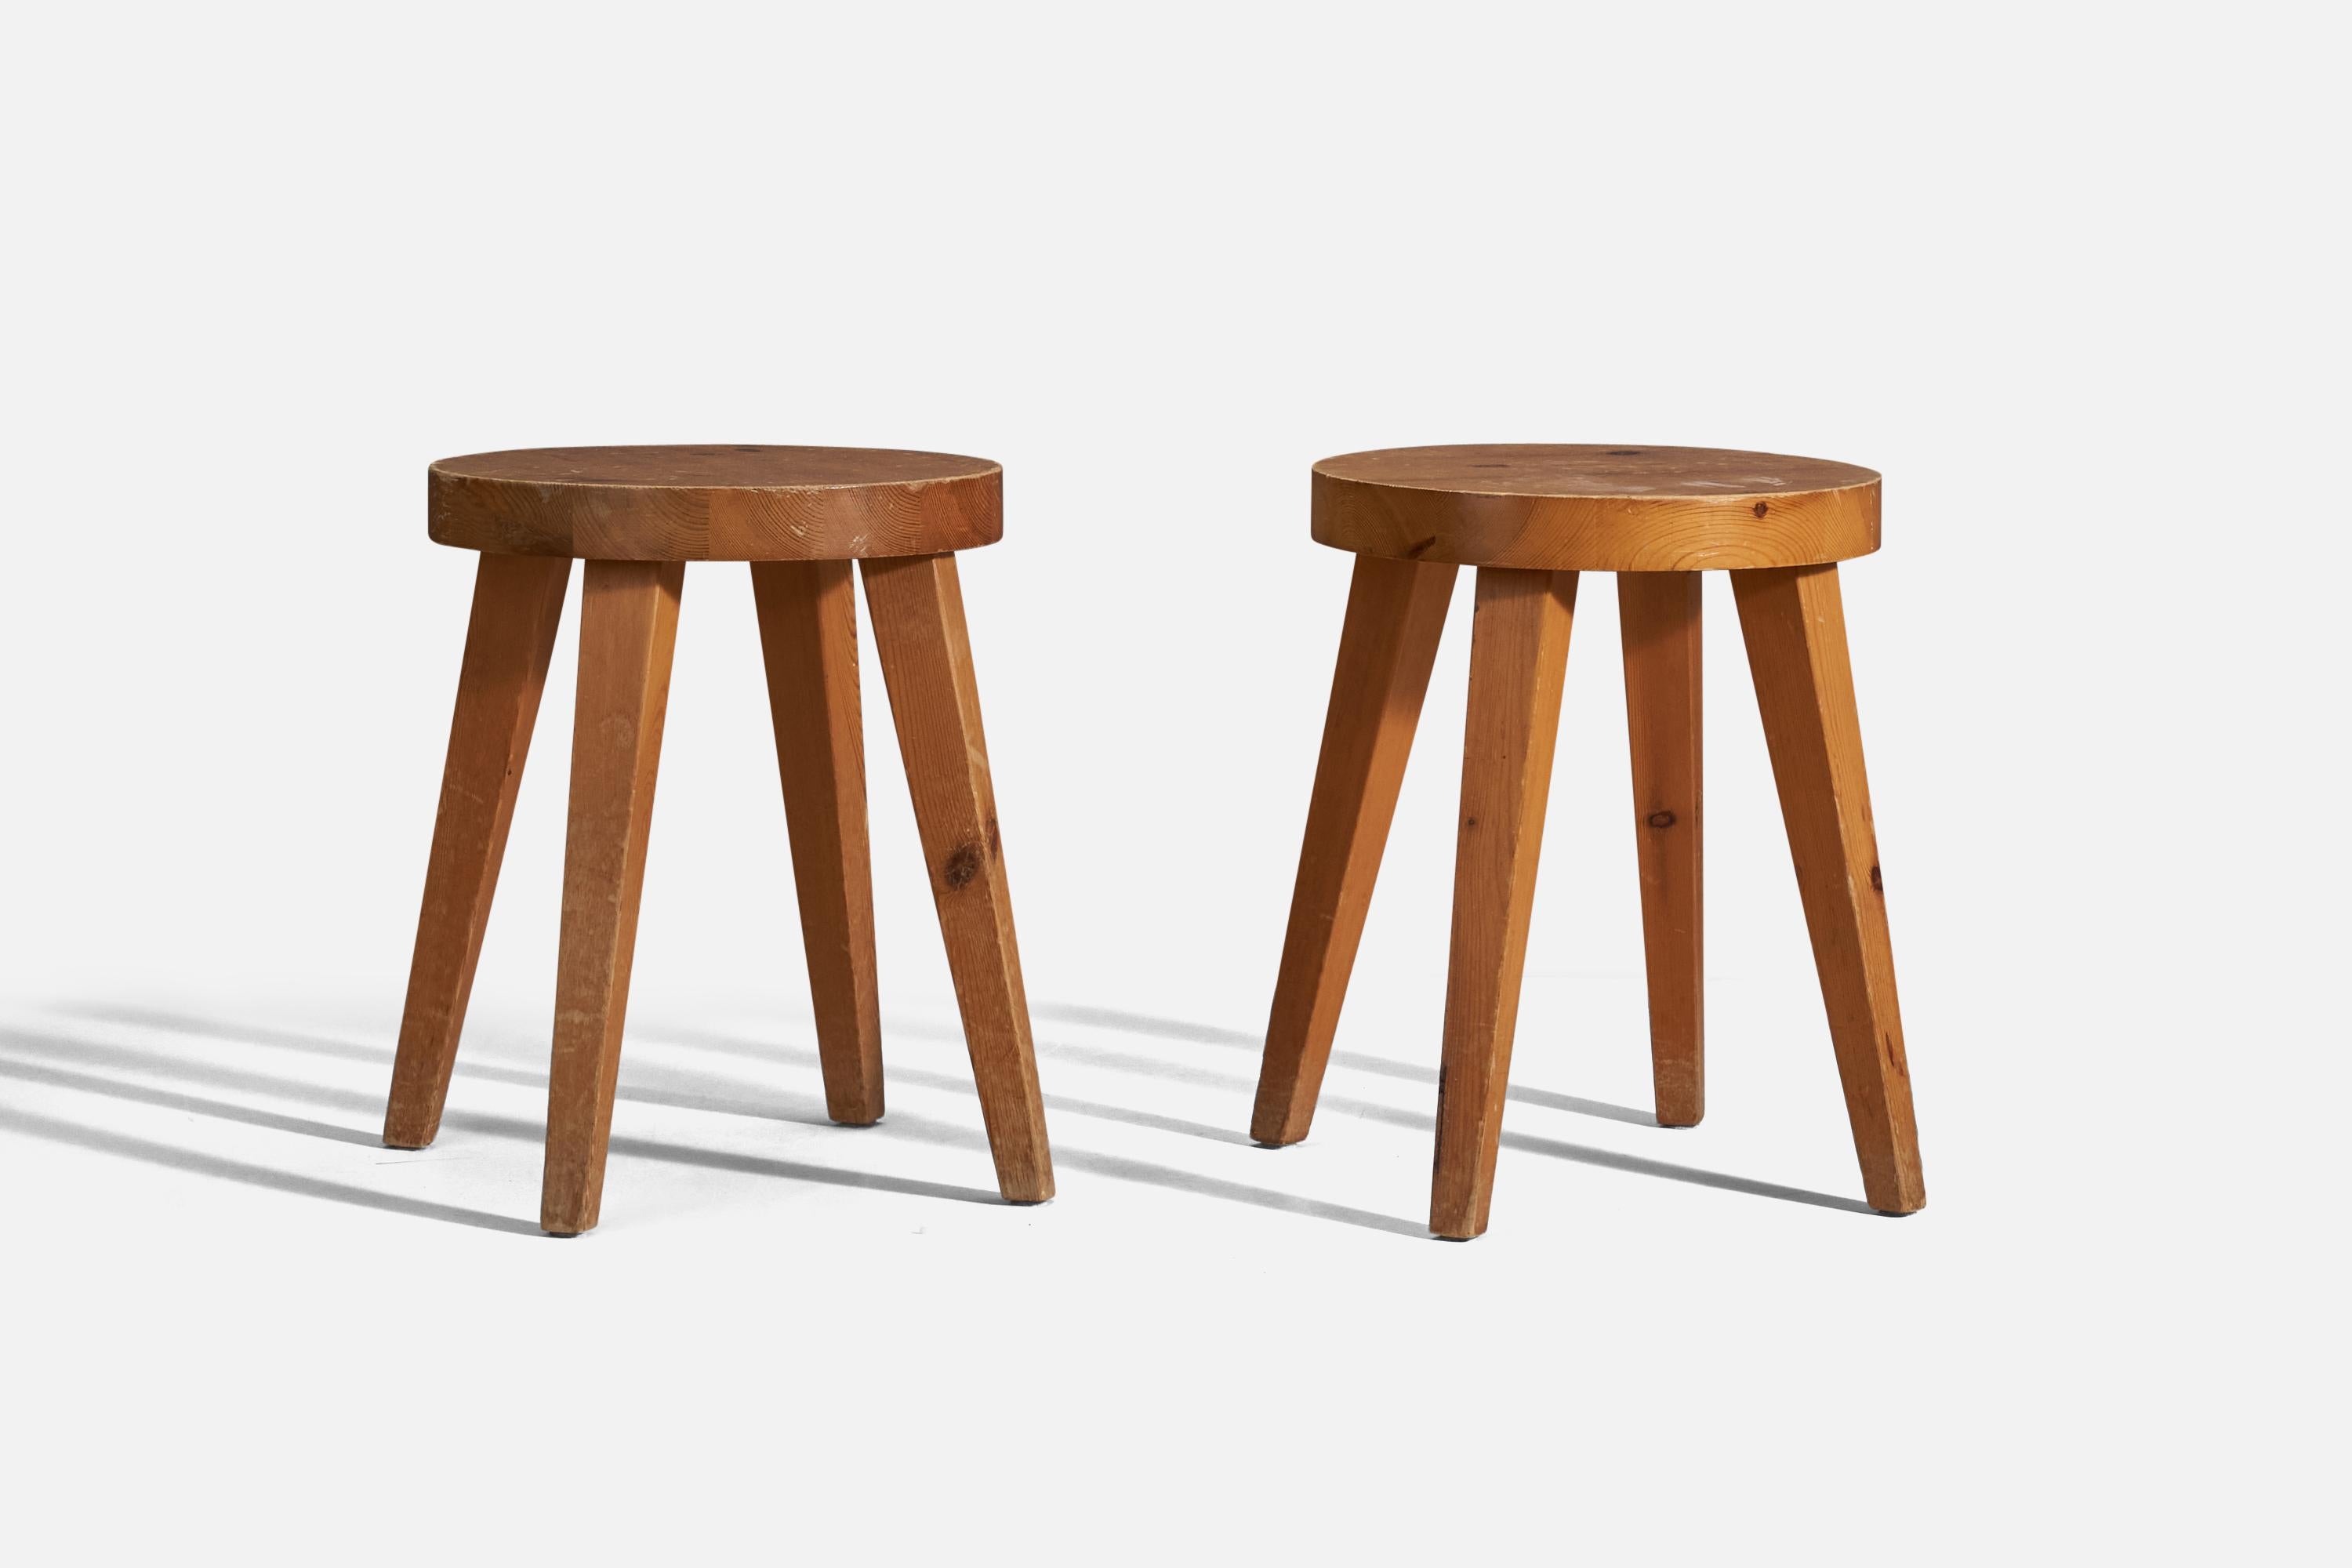 A pair of pine stools designed and produced in Sweden, 1950s.